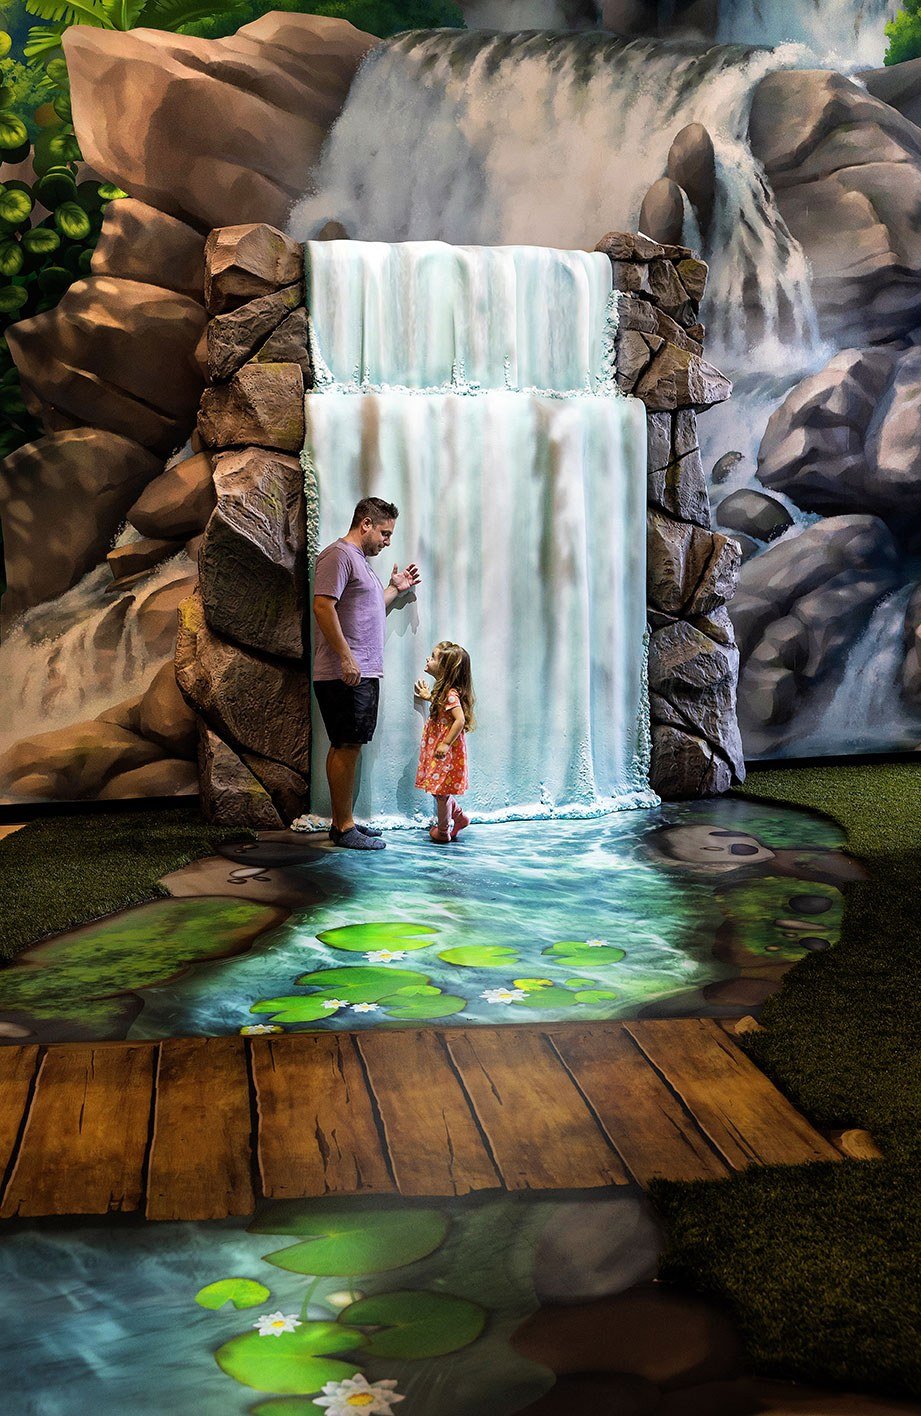 Giant Animated Waterfall and River feature at West Chicago Parks District ARC Center